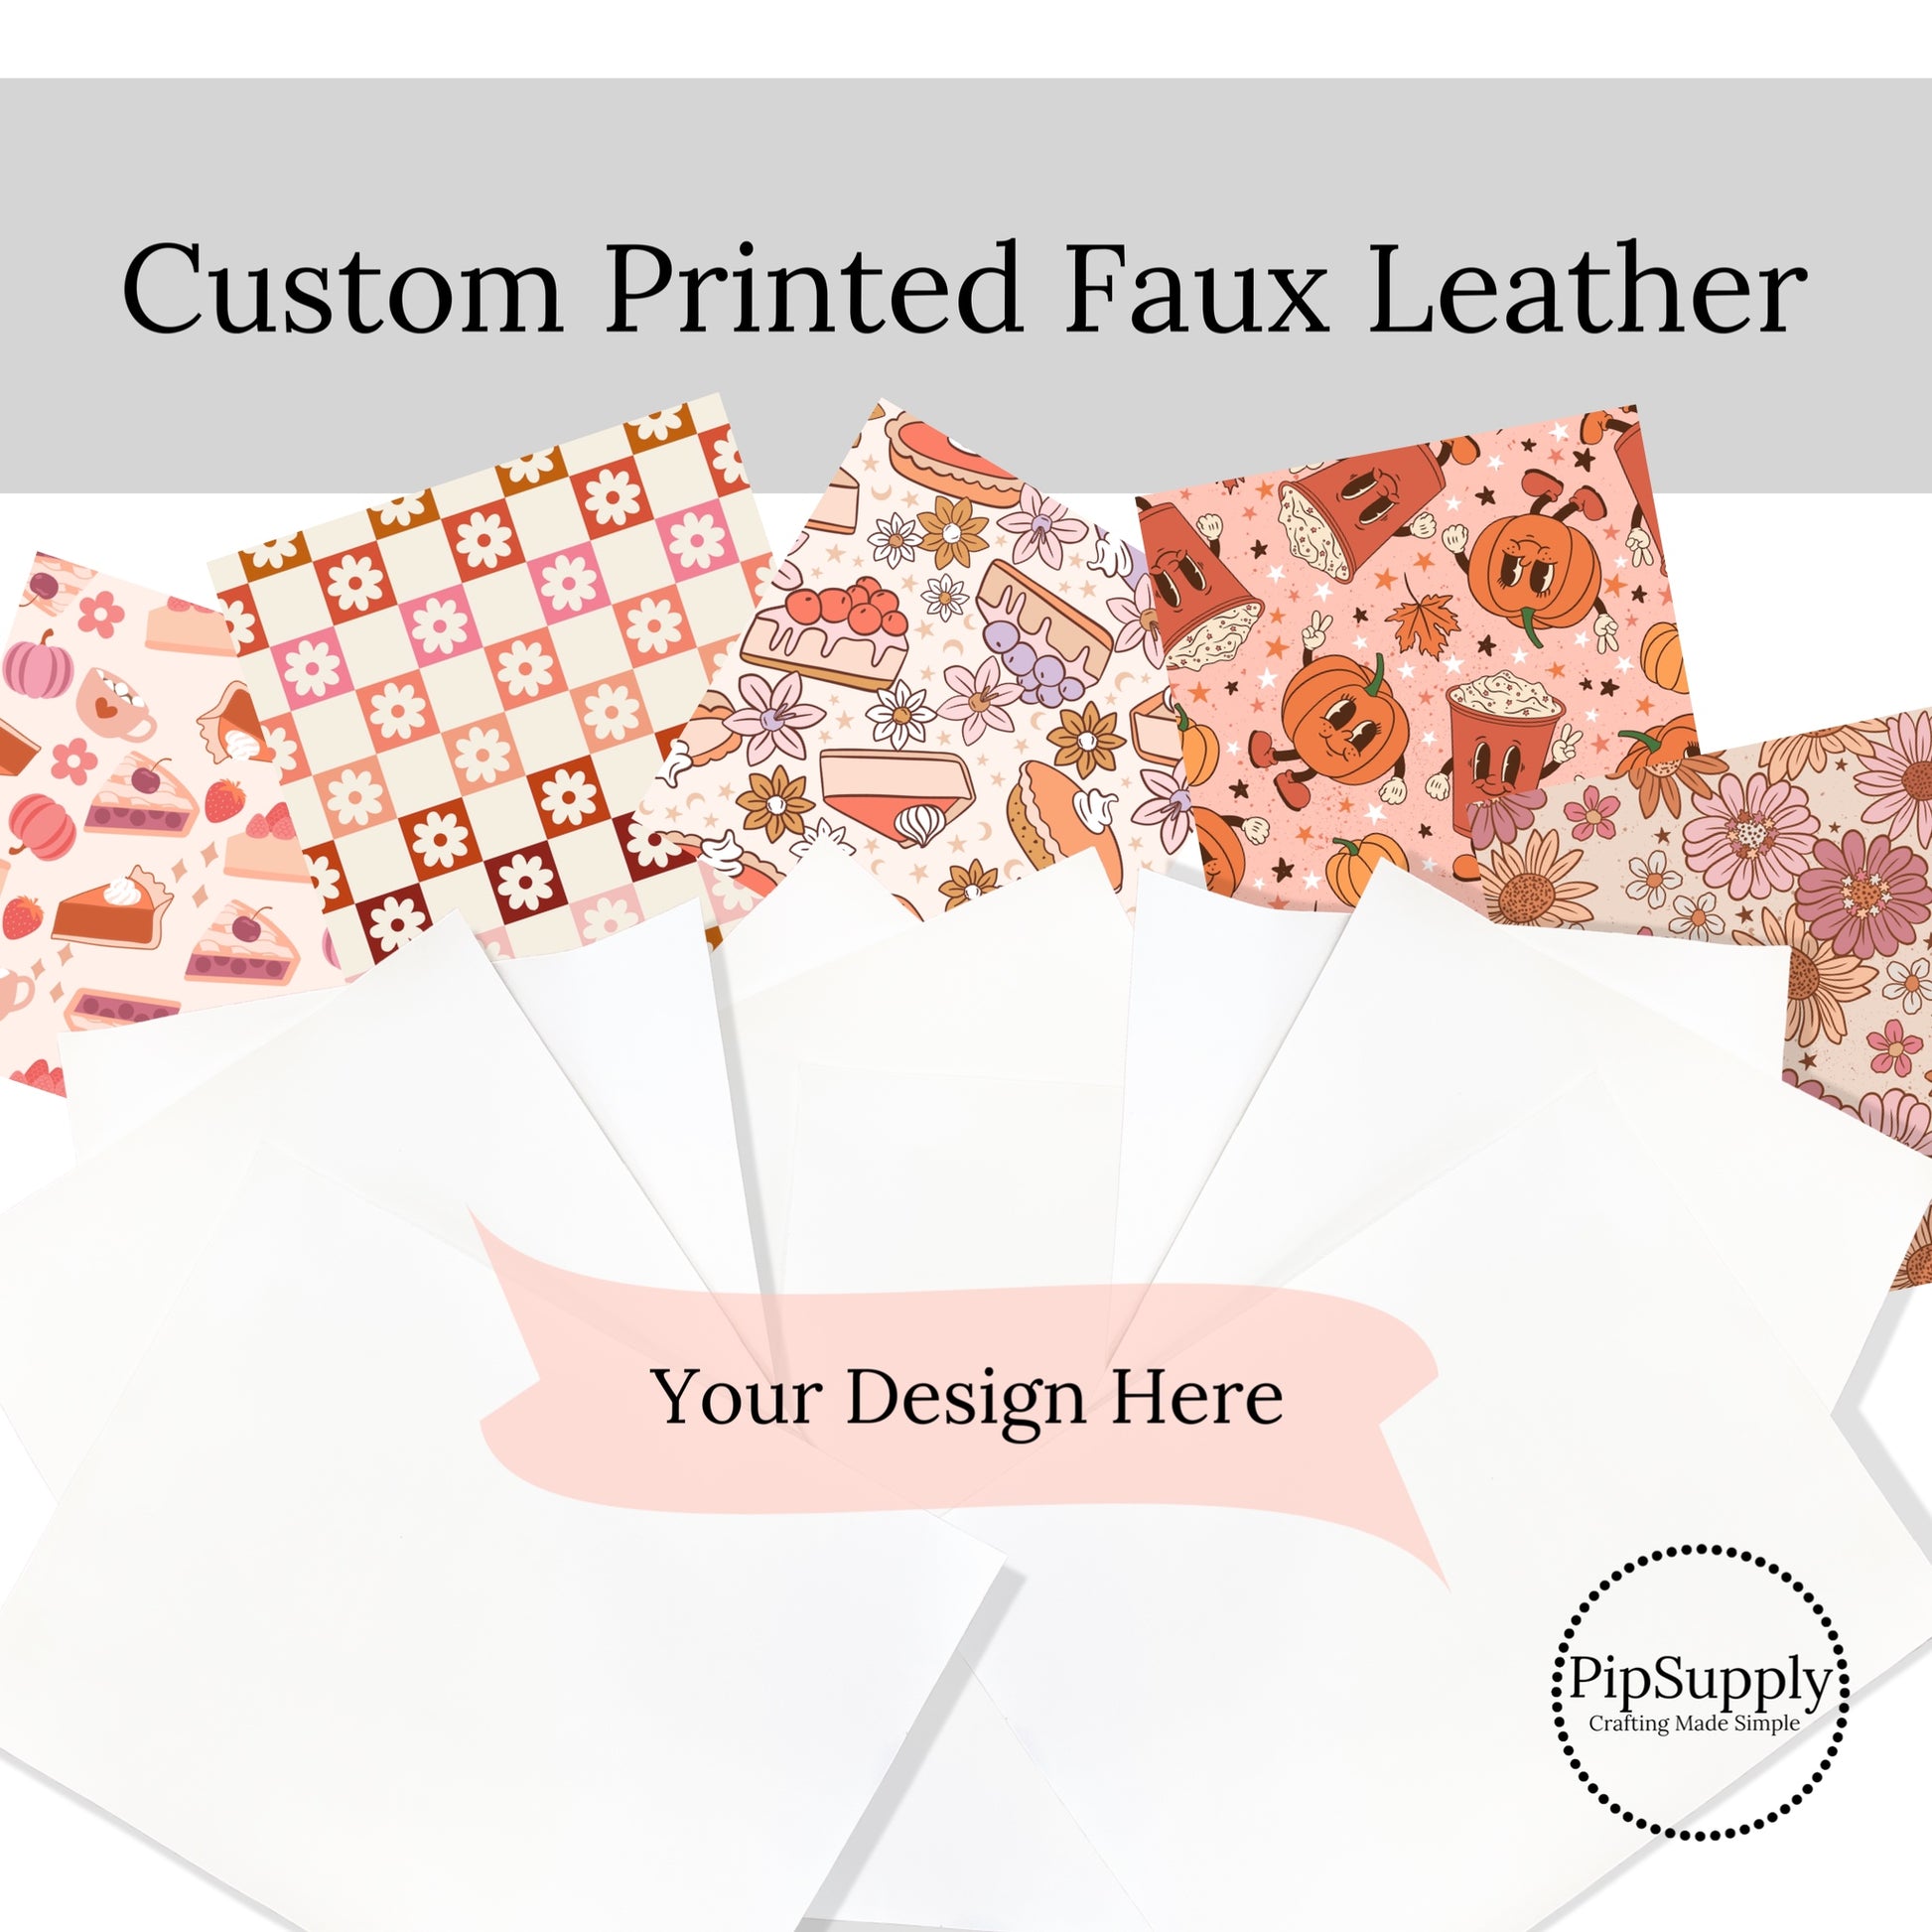 Bass Faux Leather Sheet/printed Faux Leather for 